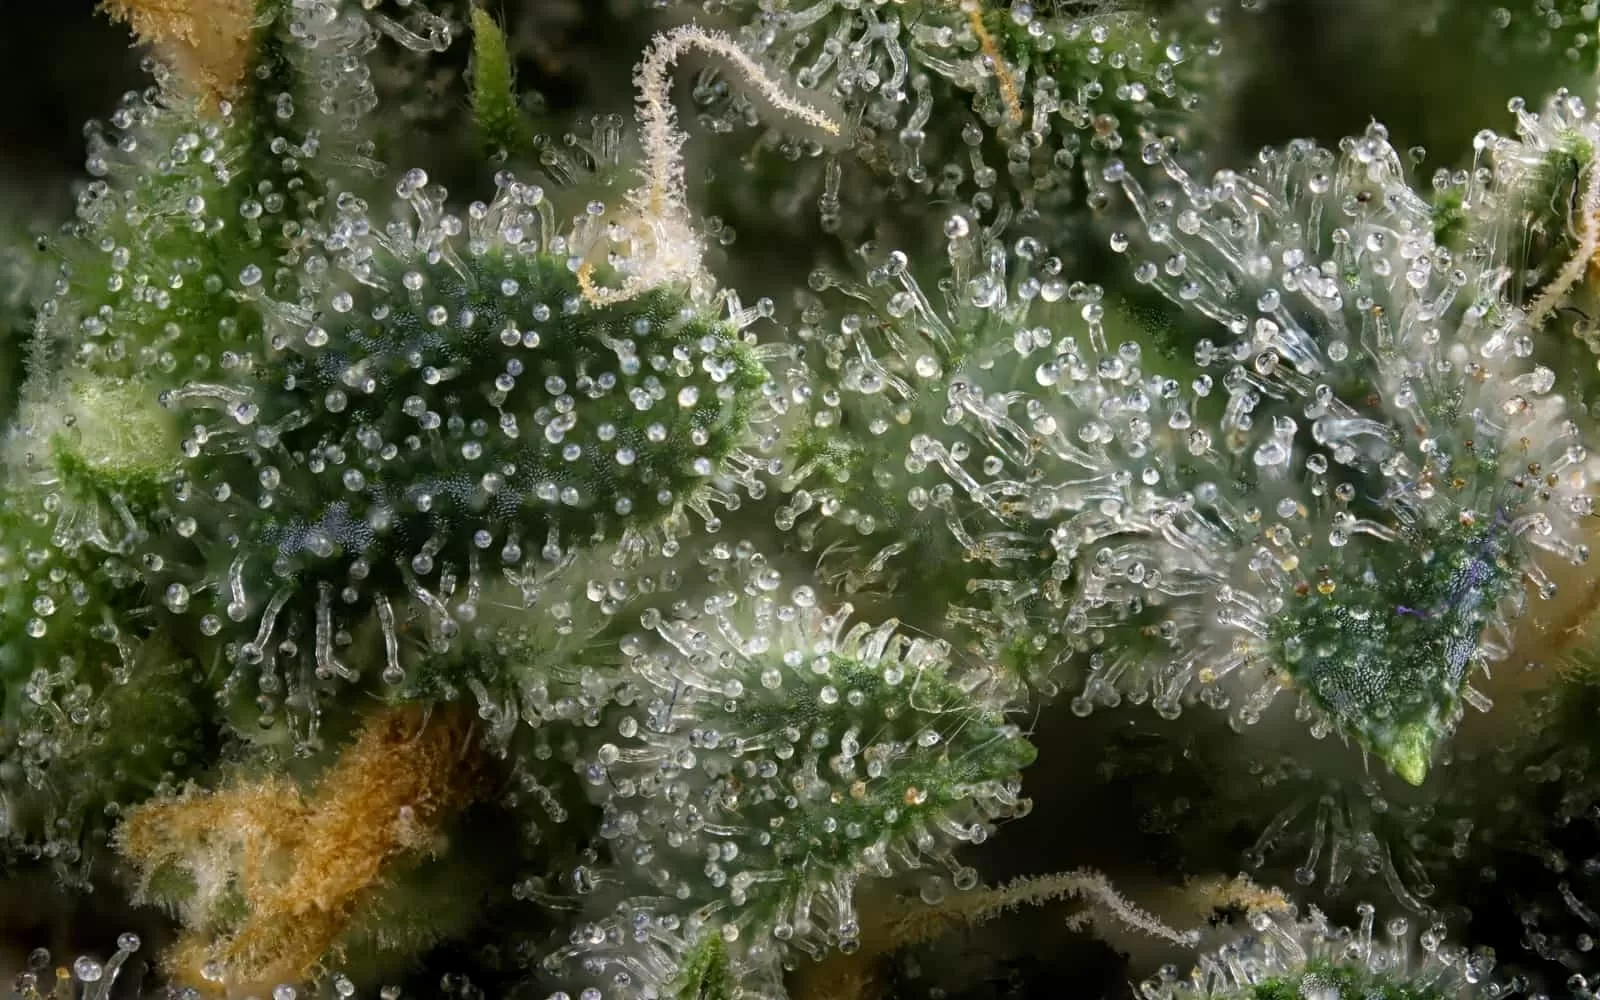 the terpenes present in different flowers such as cannabis are nothing more than essential oils that determine the aroma of each species. They are actually able to act as modulators of the cannabinoid effect, thereby enhancing the effects of CBD and THC.